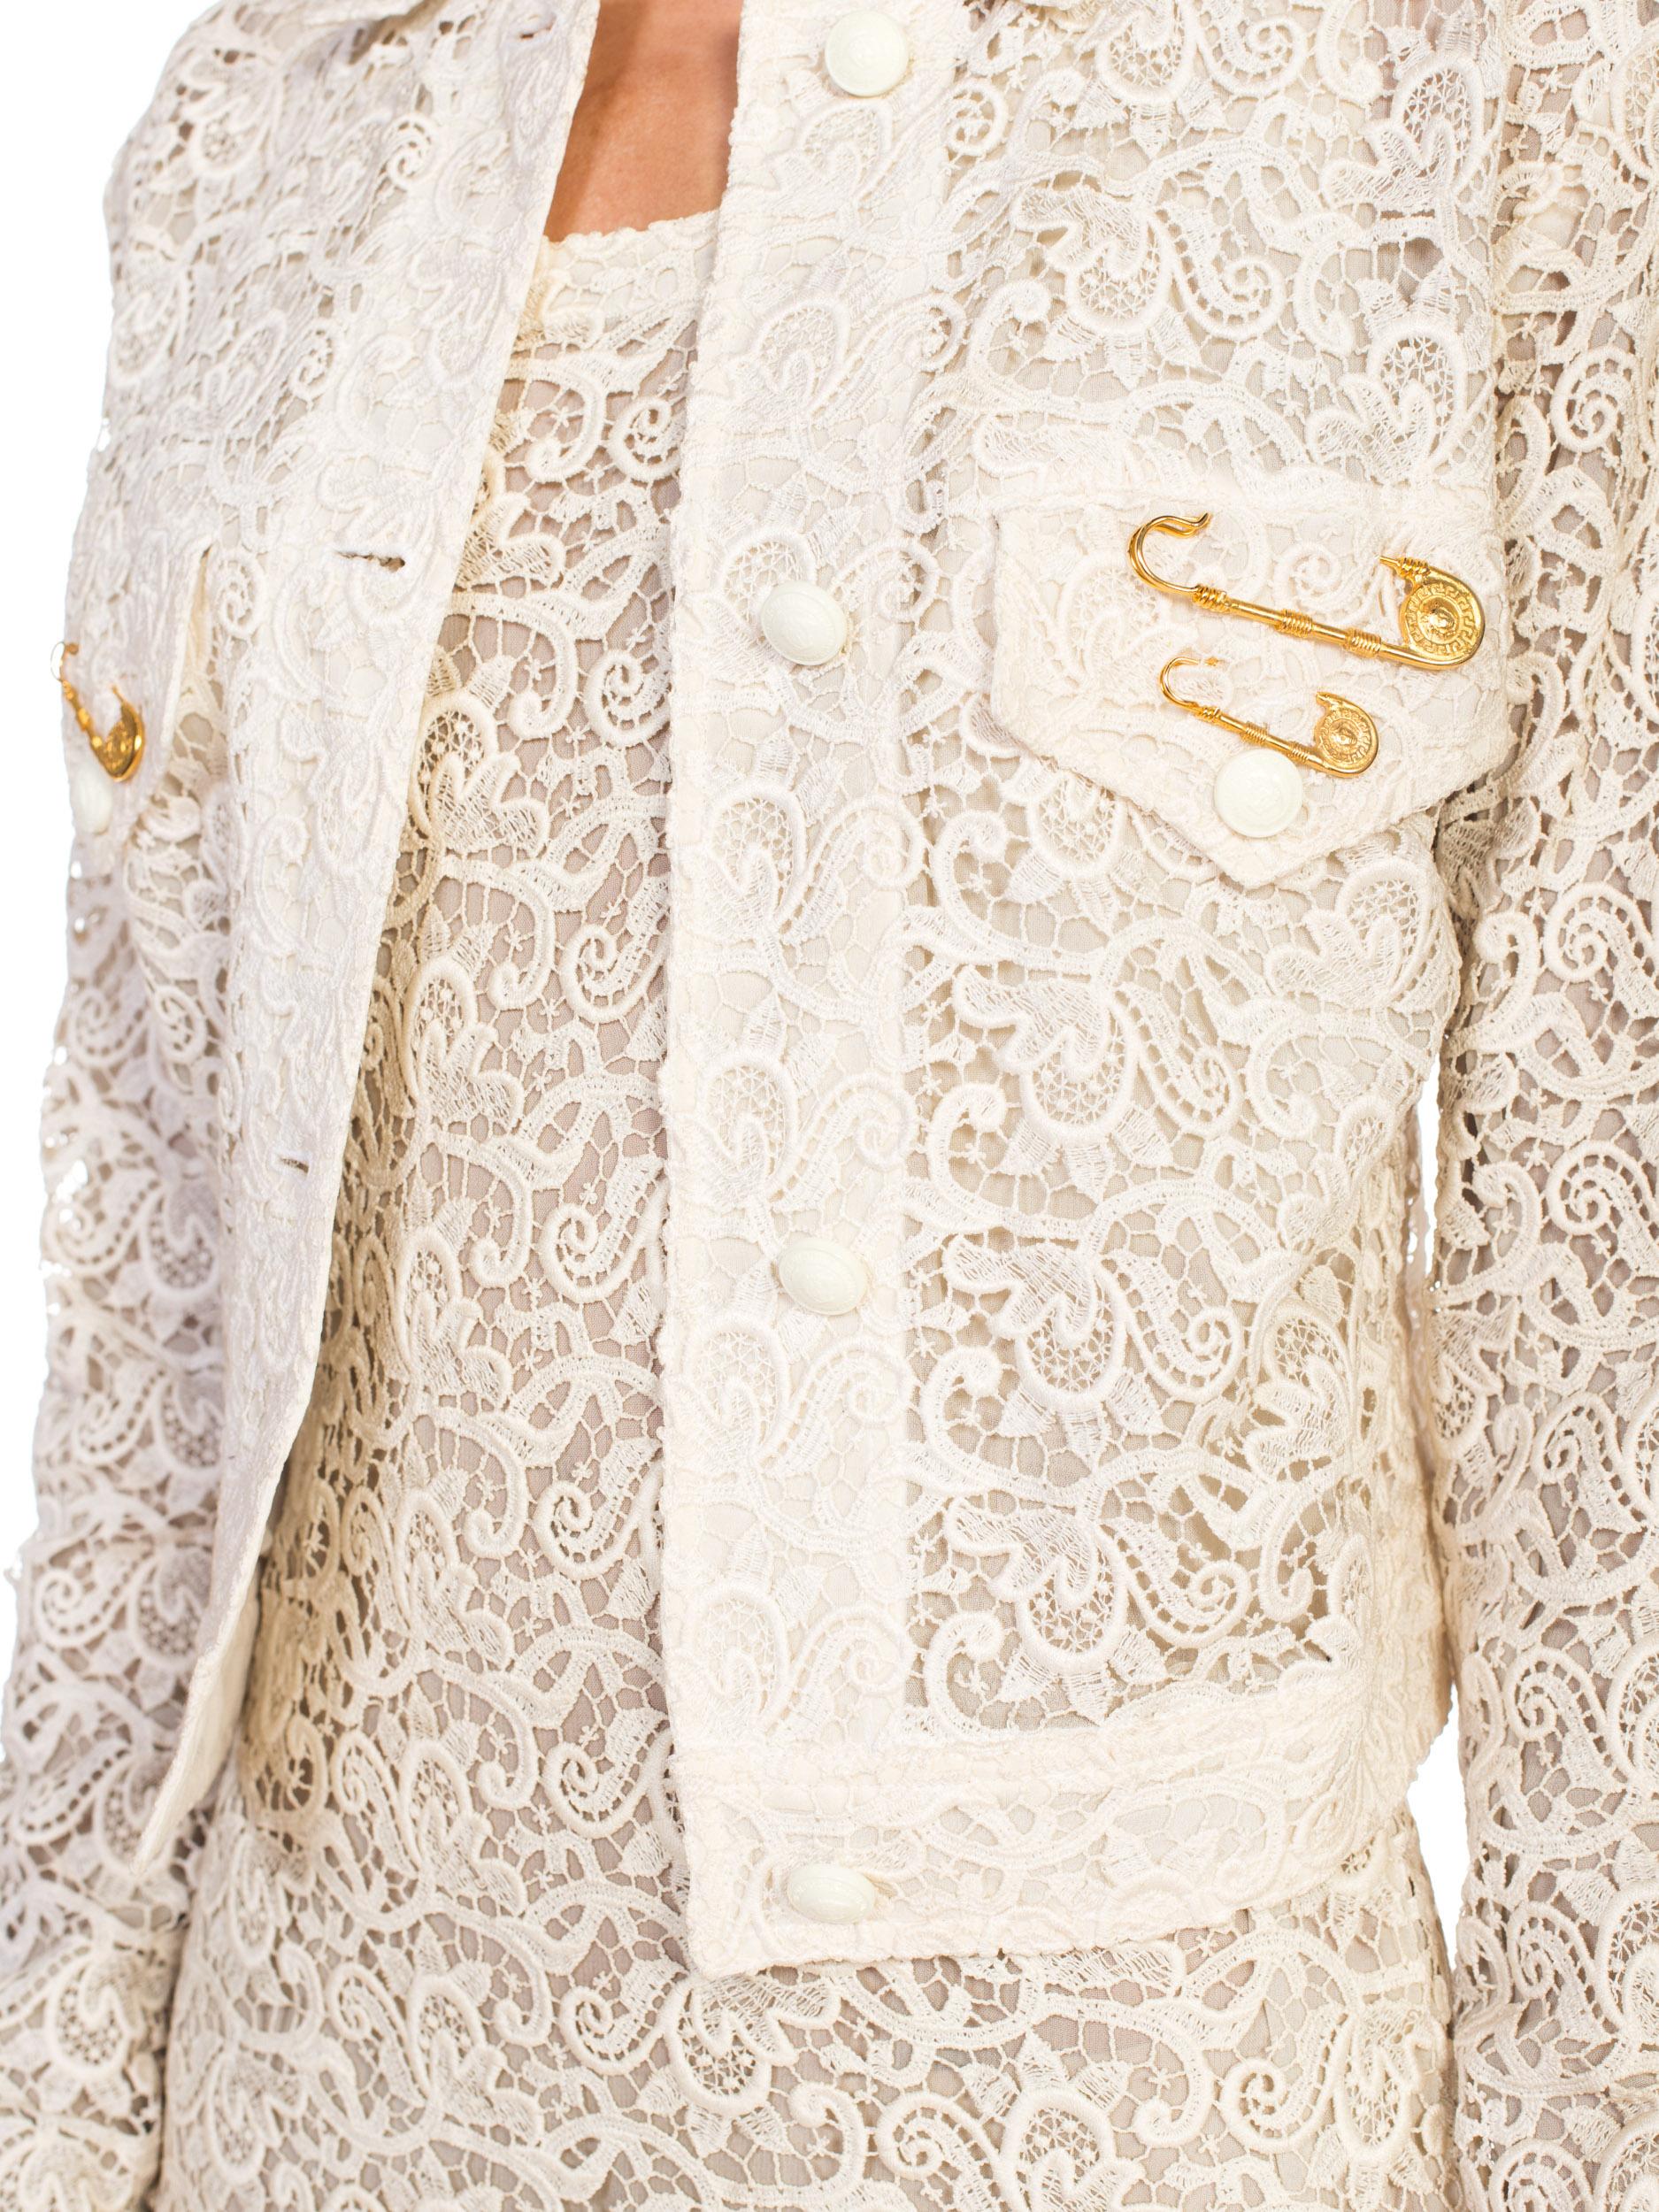 Sexy 1990s Gianni Versace Punk Safety Pin Collection Cream Lace Dress & Jacket 9